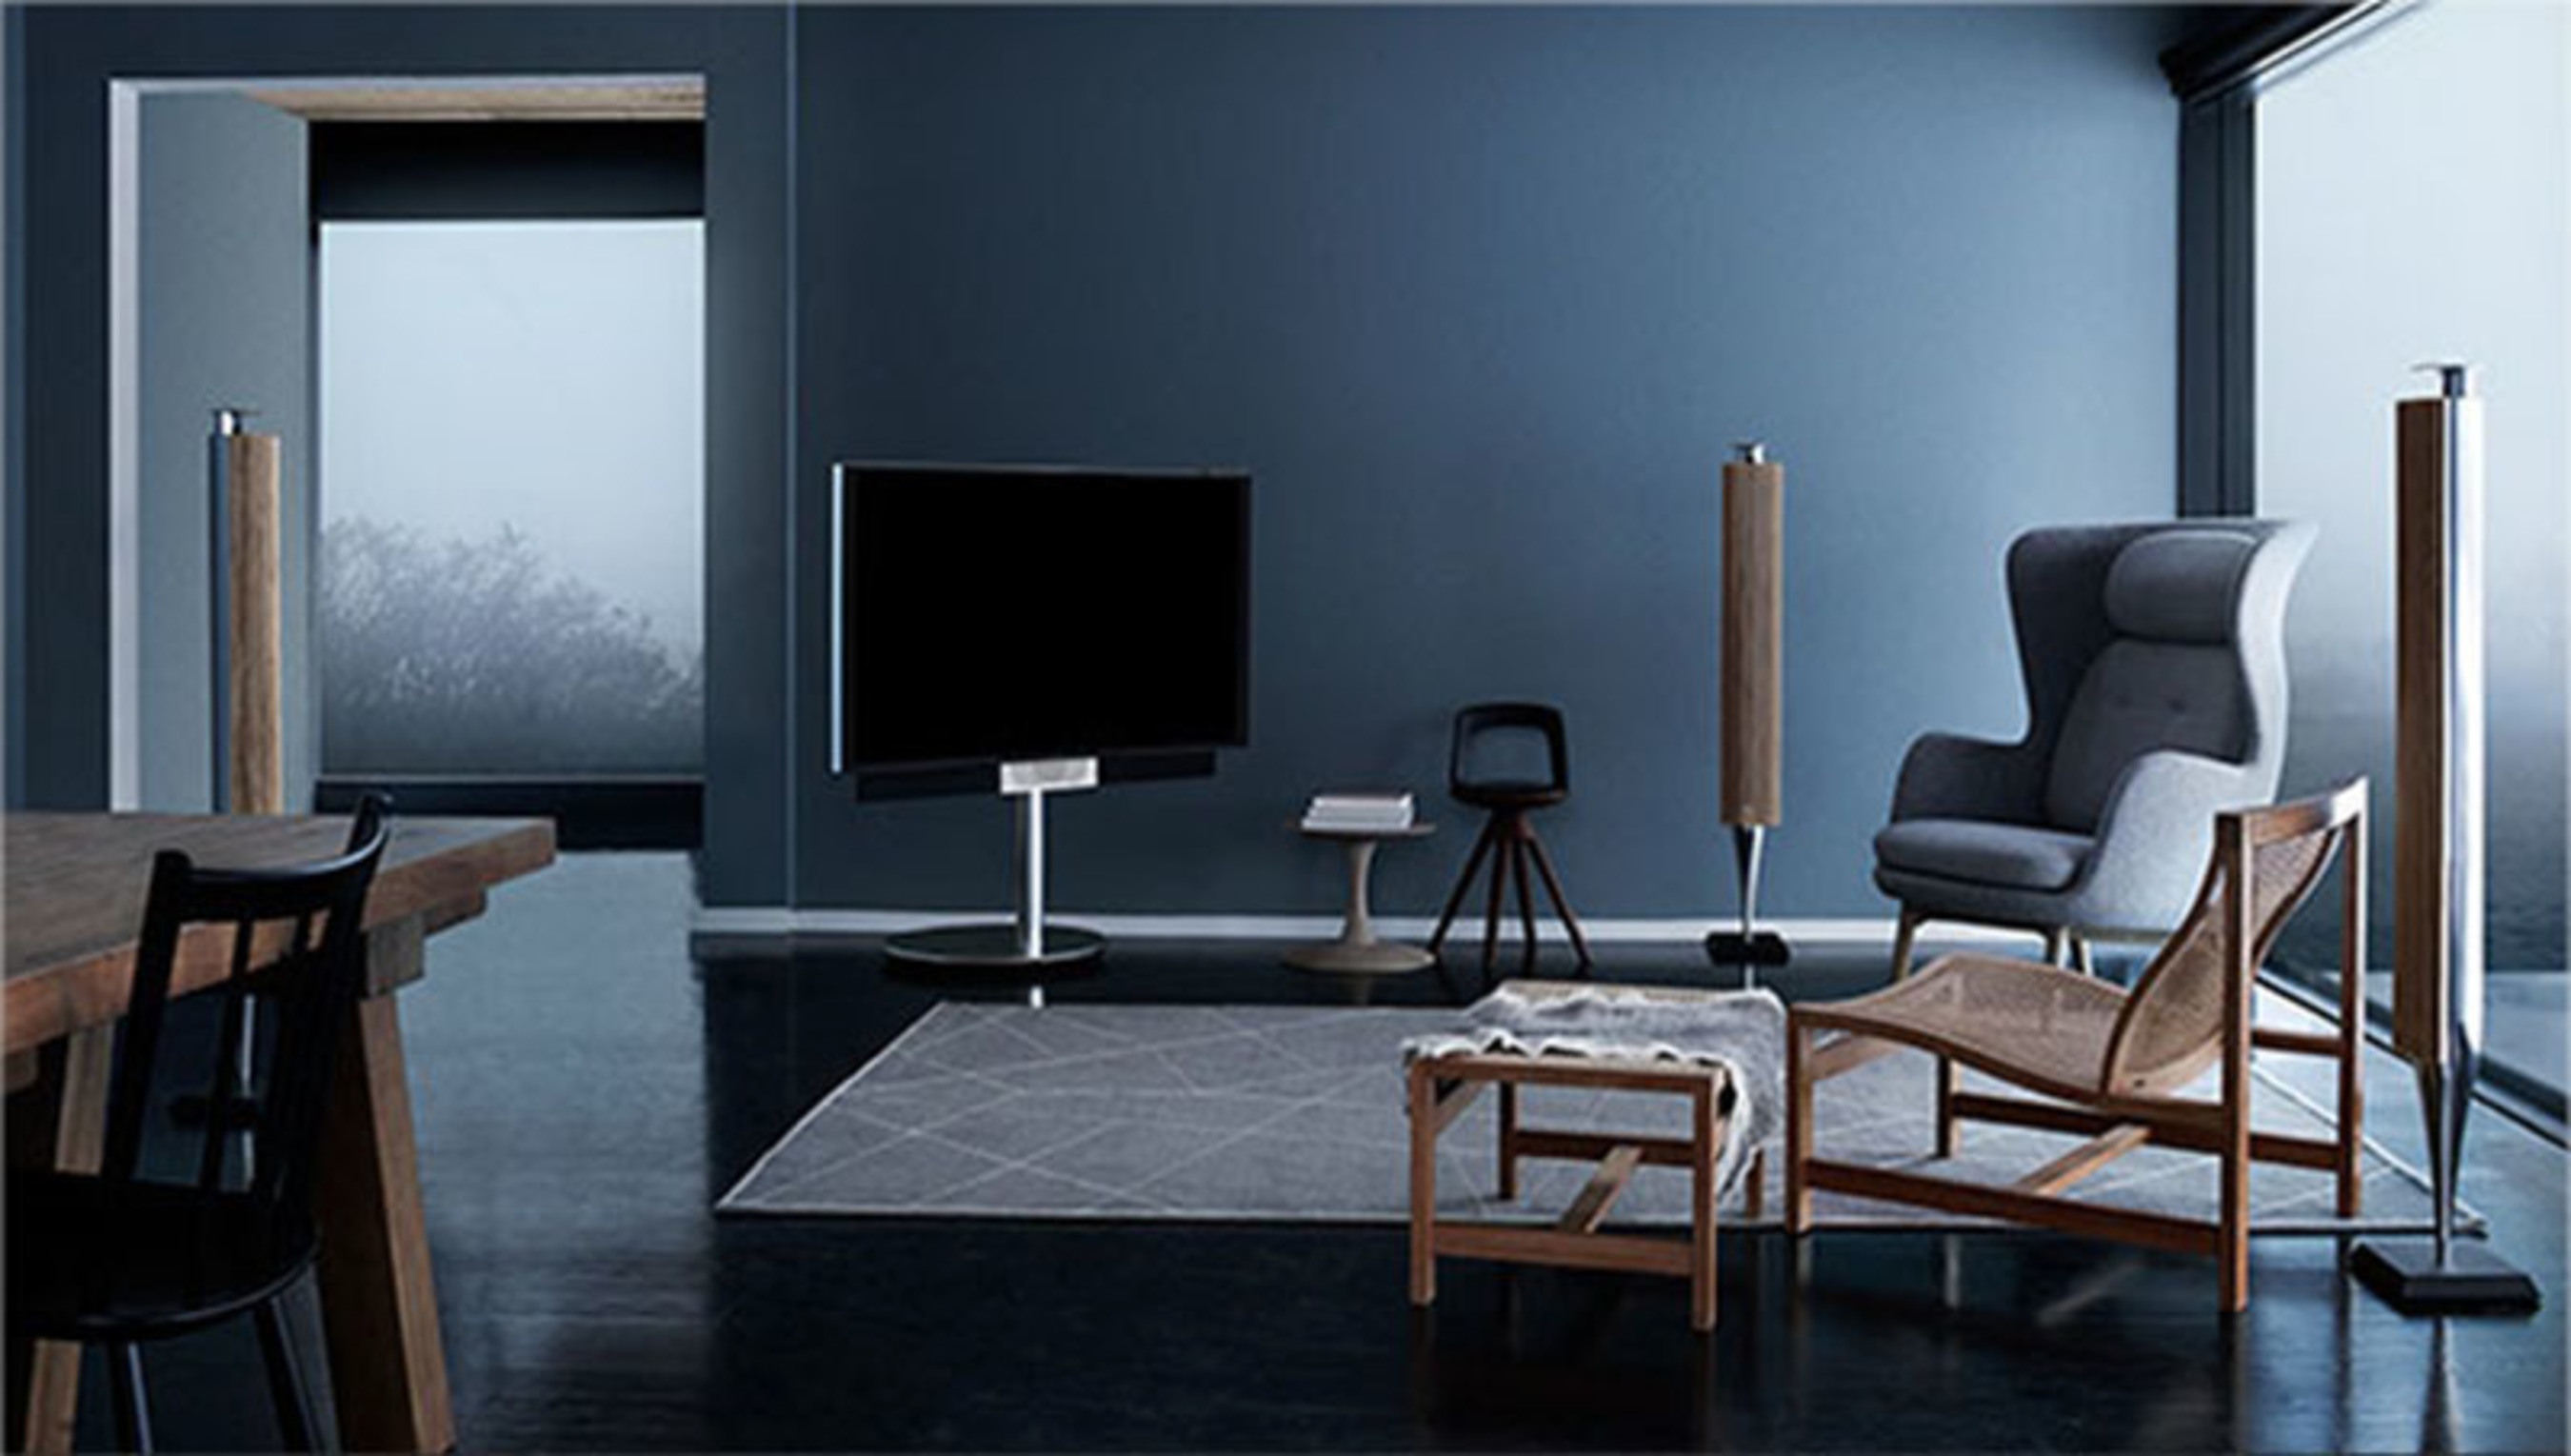 BeoVision Avant - a NEW 4K TV with intuitive simplicity and mechanical innovation (PRNewsFoto/Bang & Olufsen)